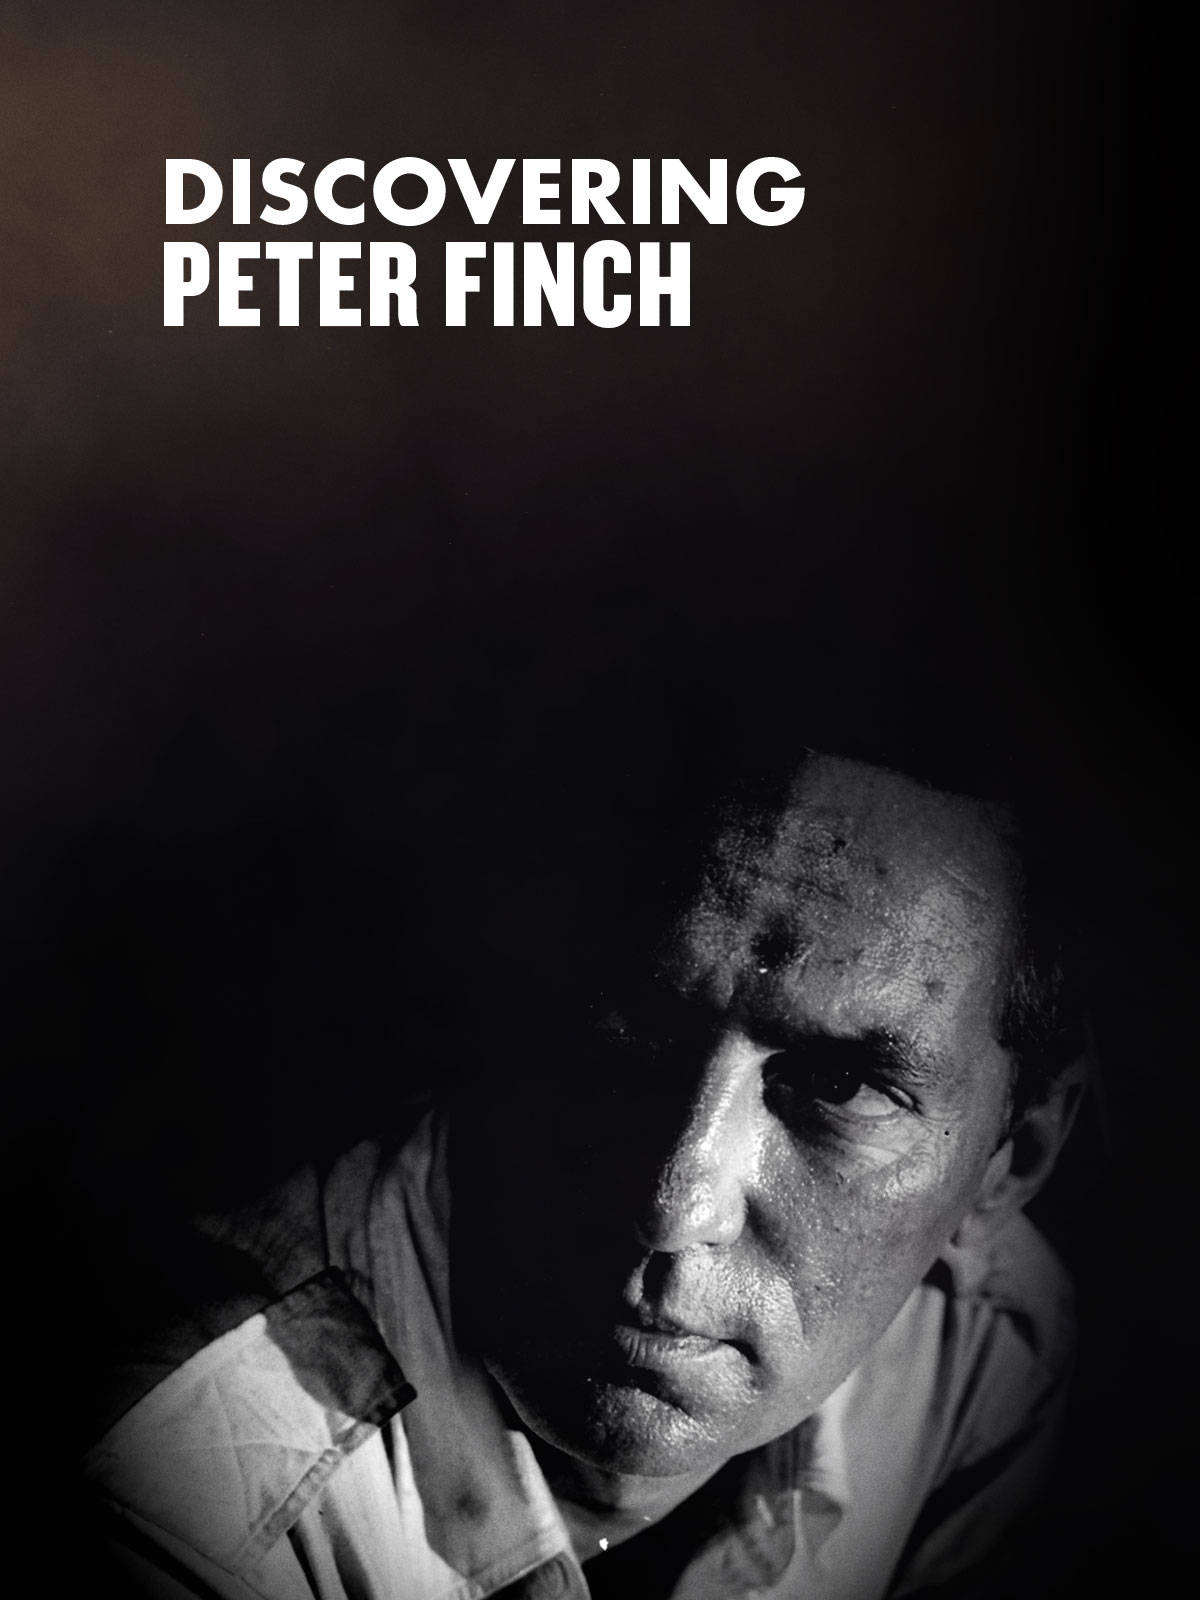 Peter Finch In The Discovering Film Wallpaper